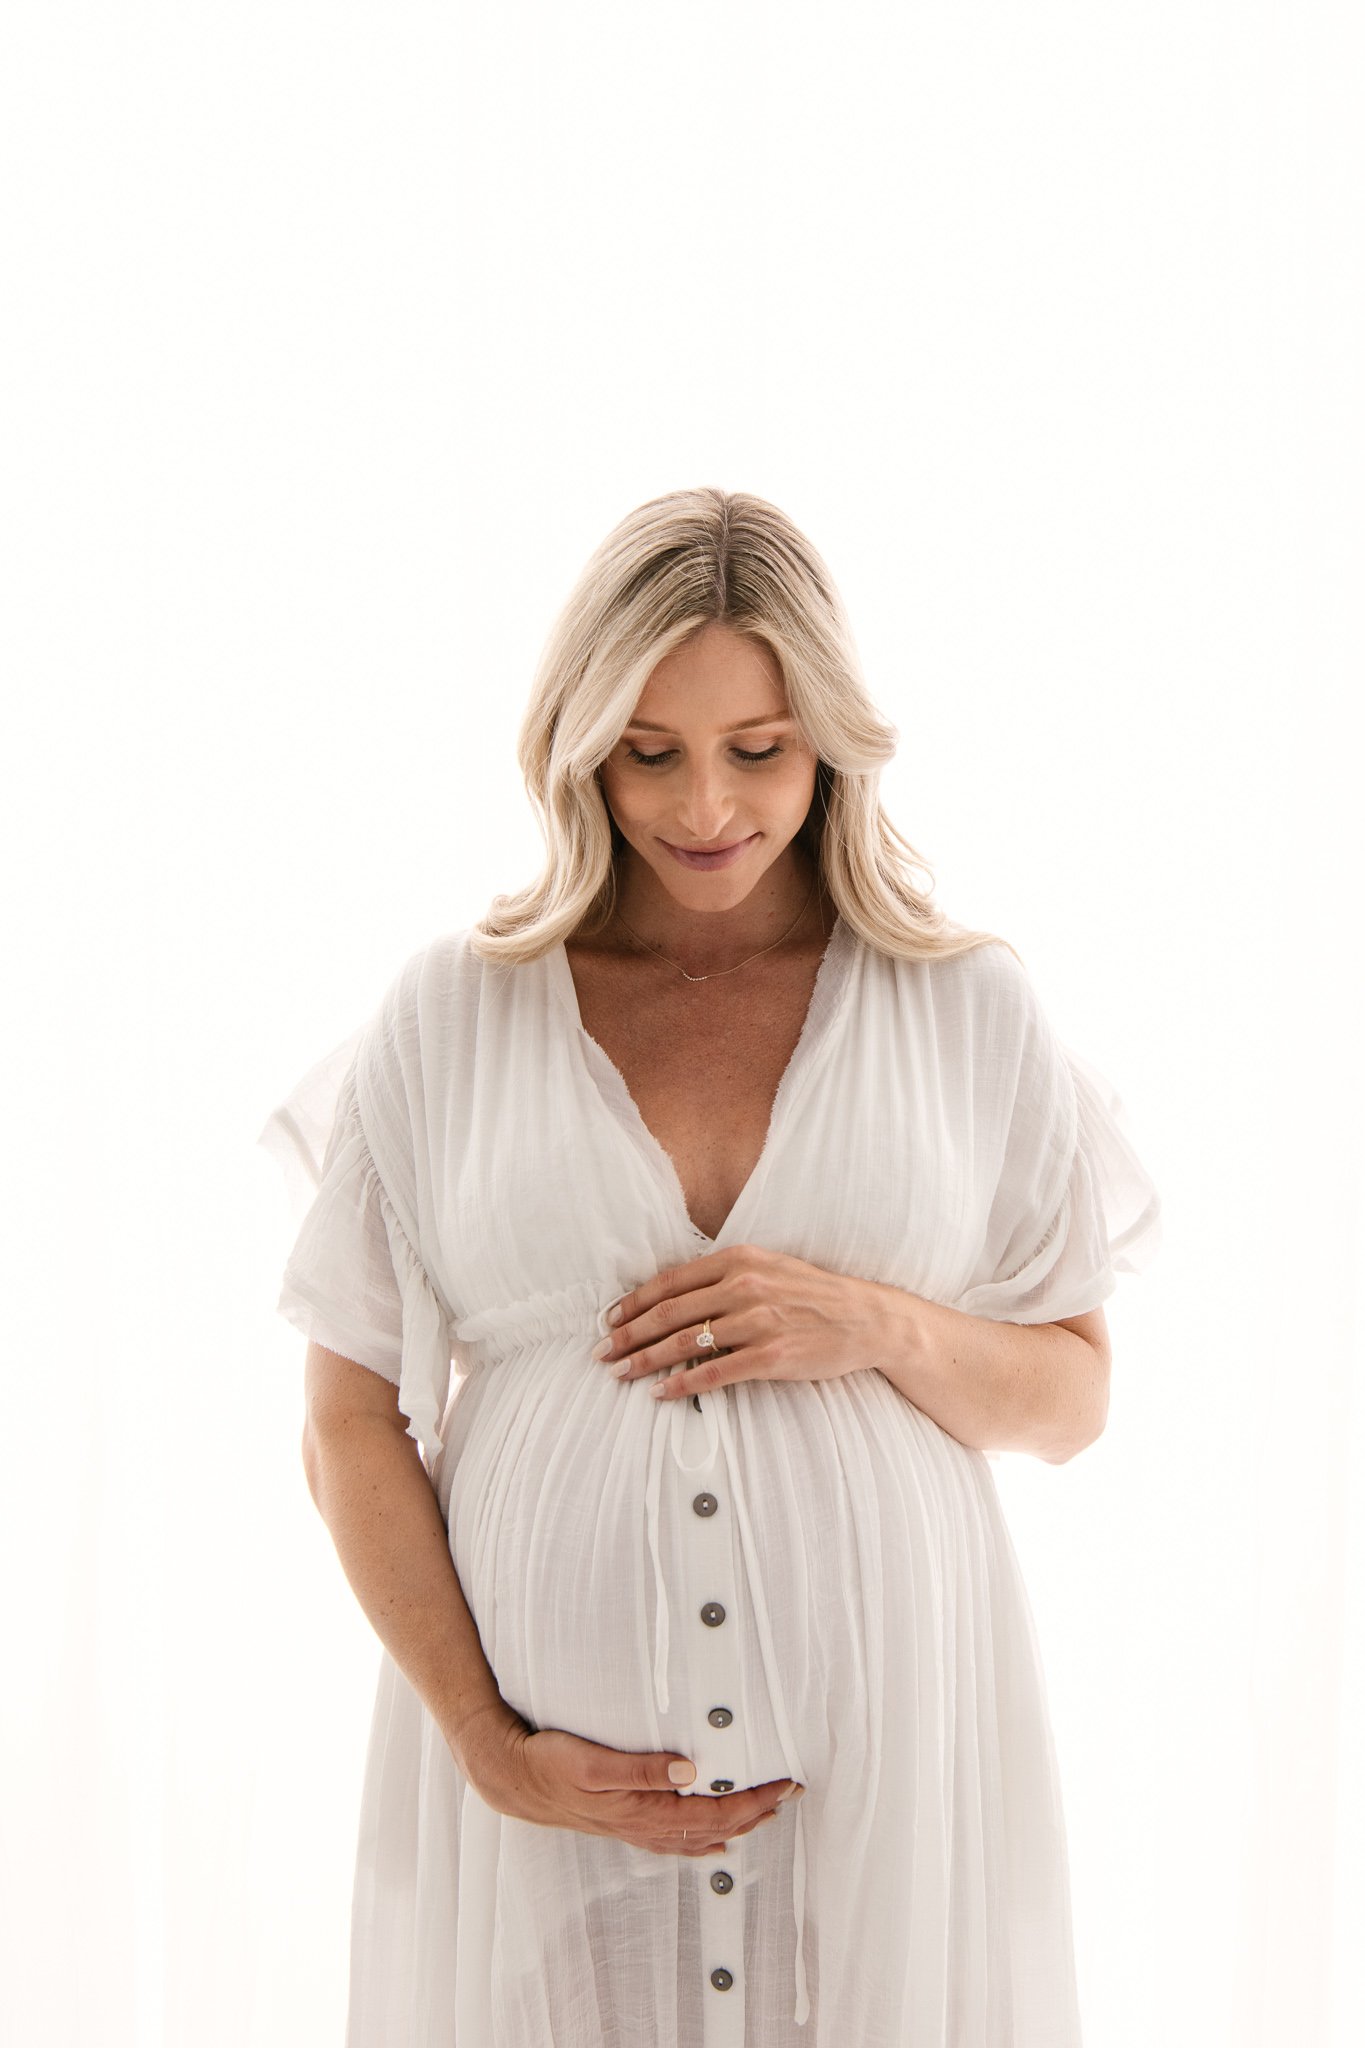  High-end studio photographer Nicole Hawkins Photography captures a woman with light featuring her face as she looks at her belly. baby #NicoleHawkinsPhotography #NicoleHawkinsMaternity #Studiomaternityportraits #NewJerseymaternity #NewYorkMaternity 